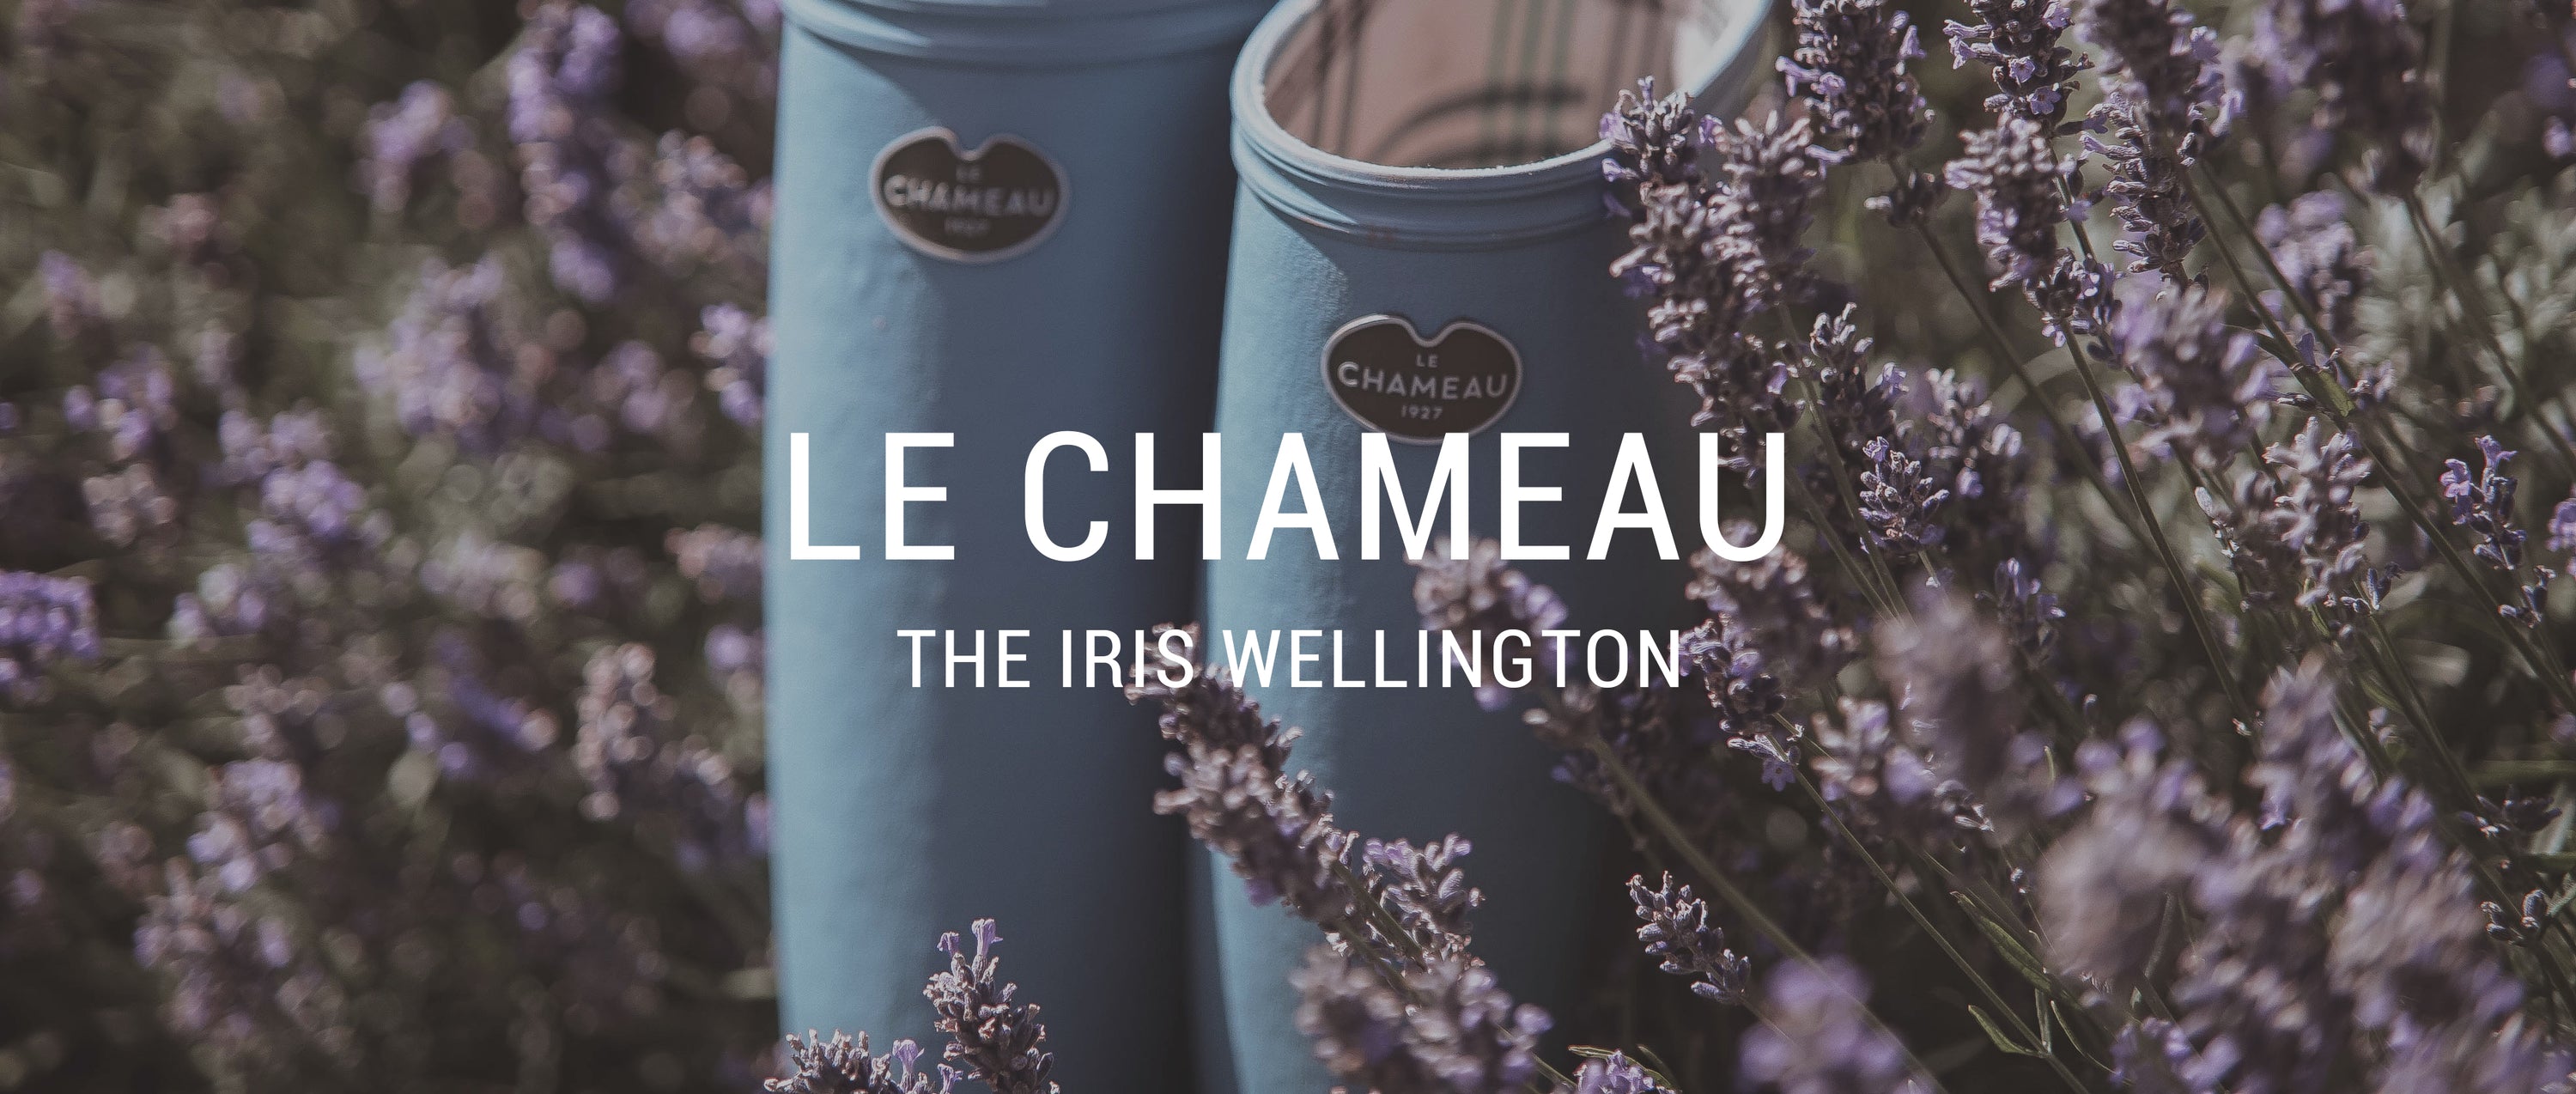 Brightening Rainy Days with Le Chameau